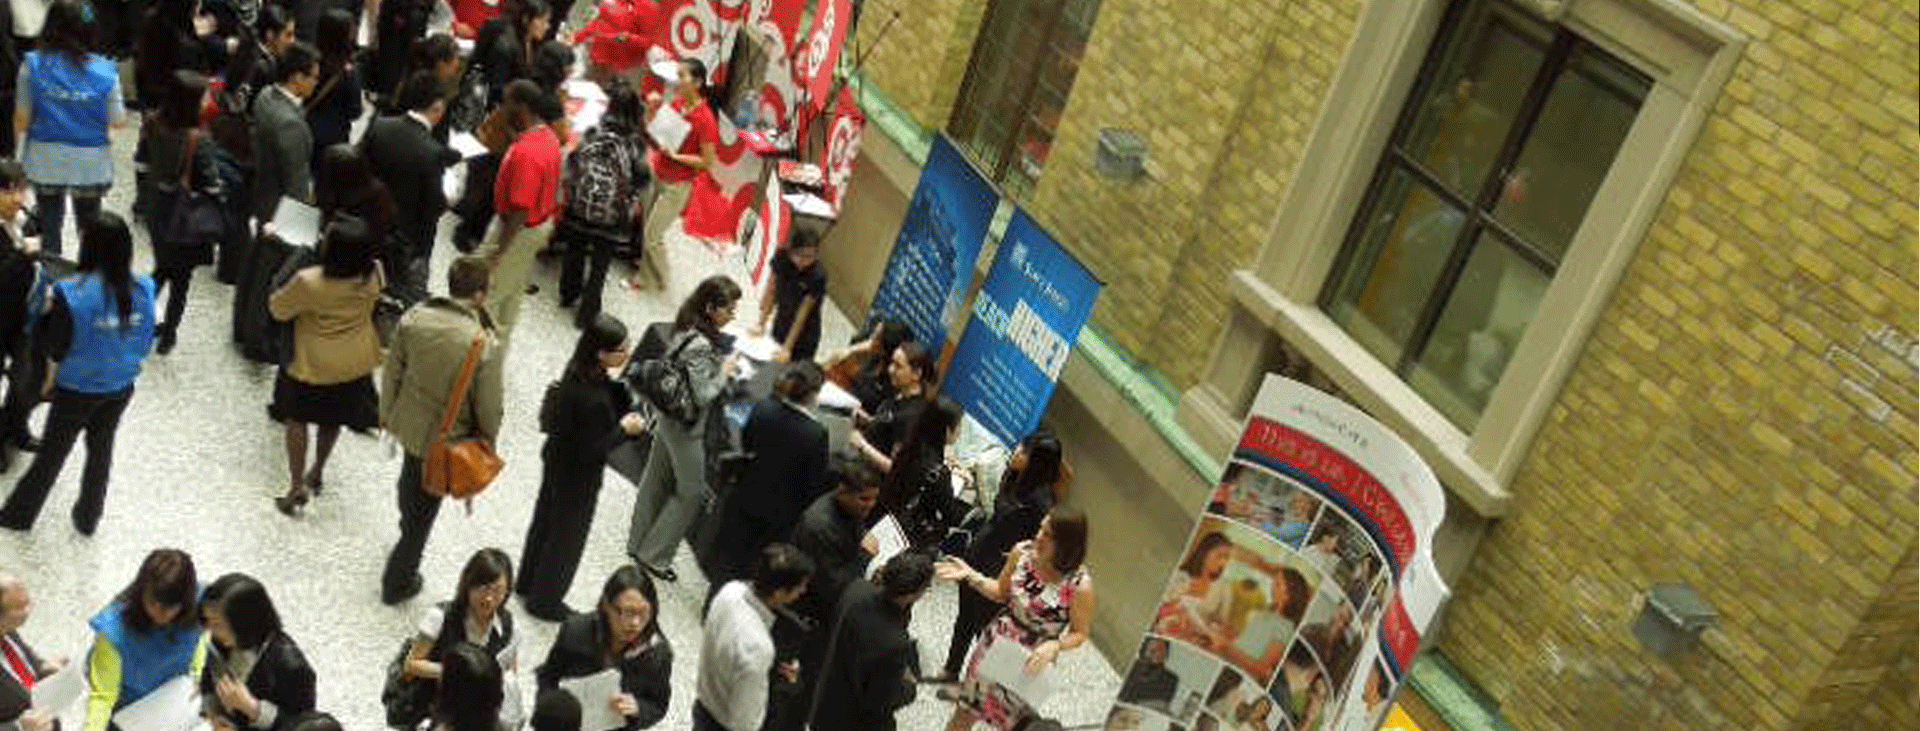 A crowd of people attending a career fair